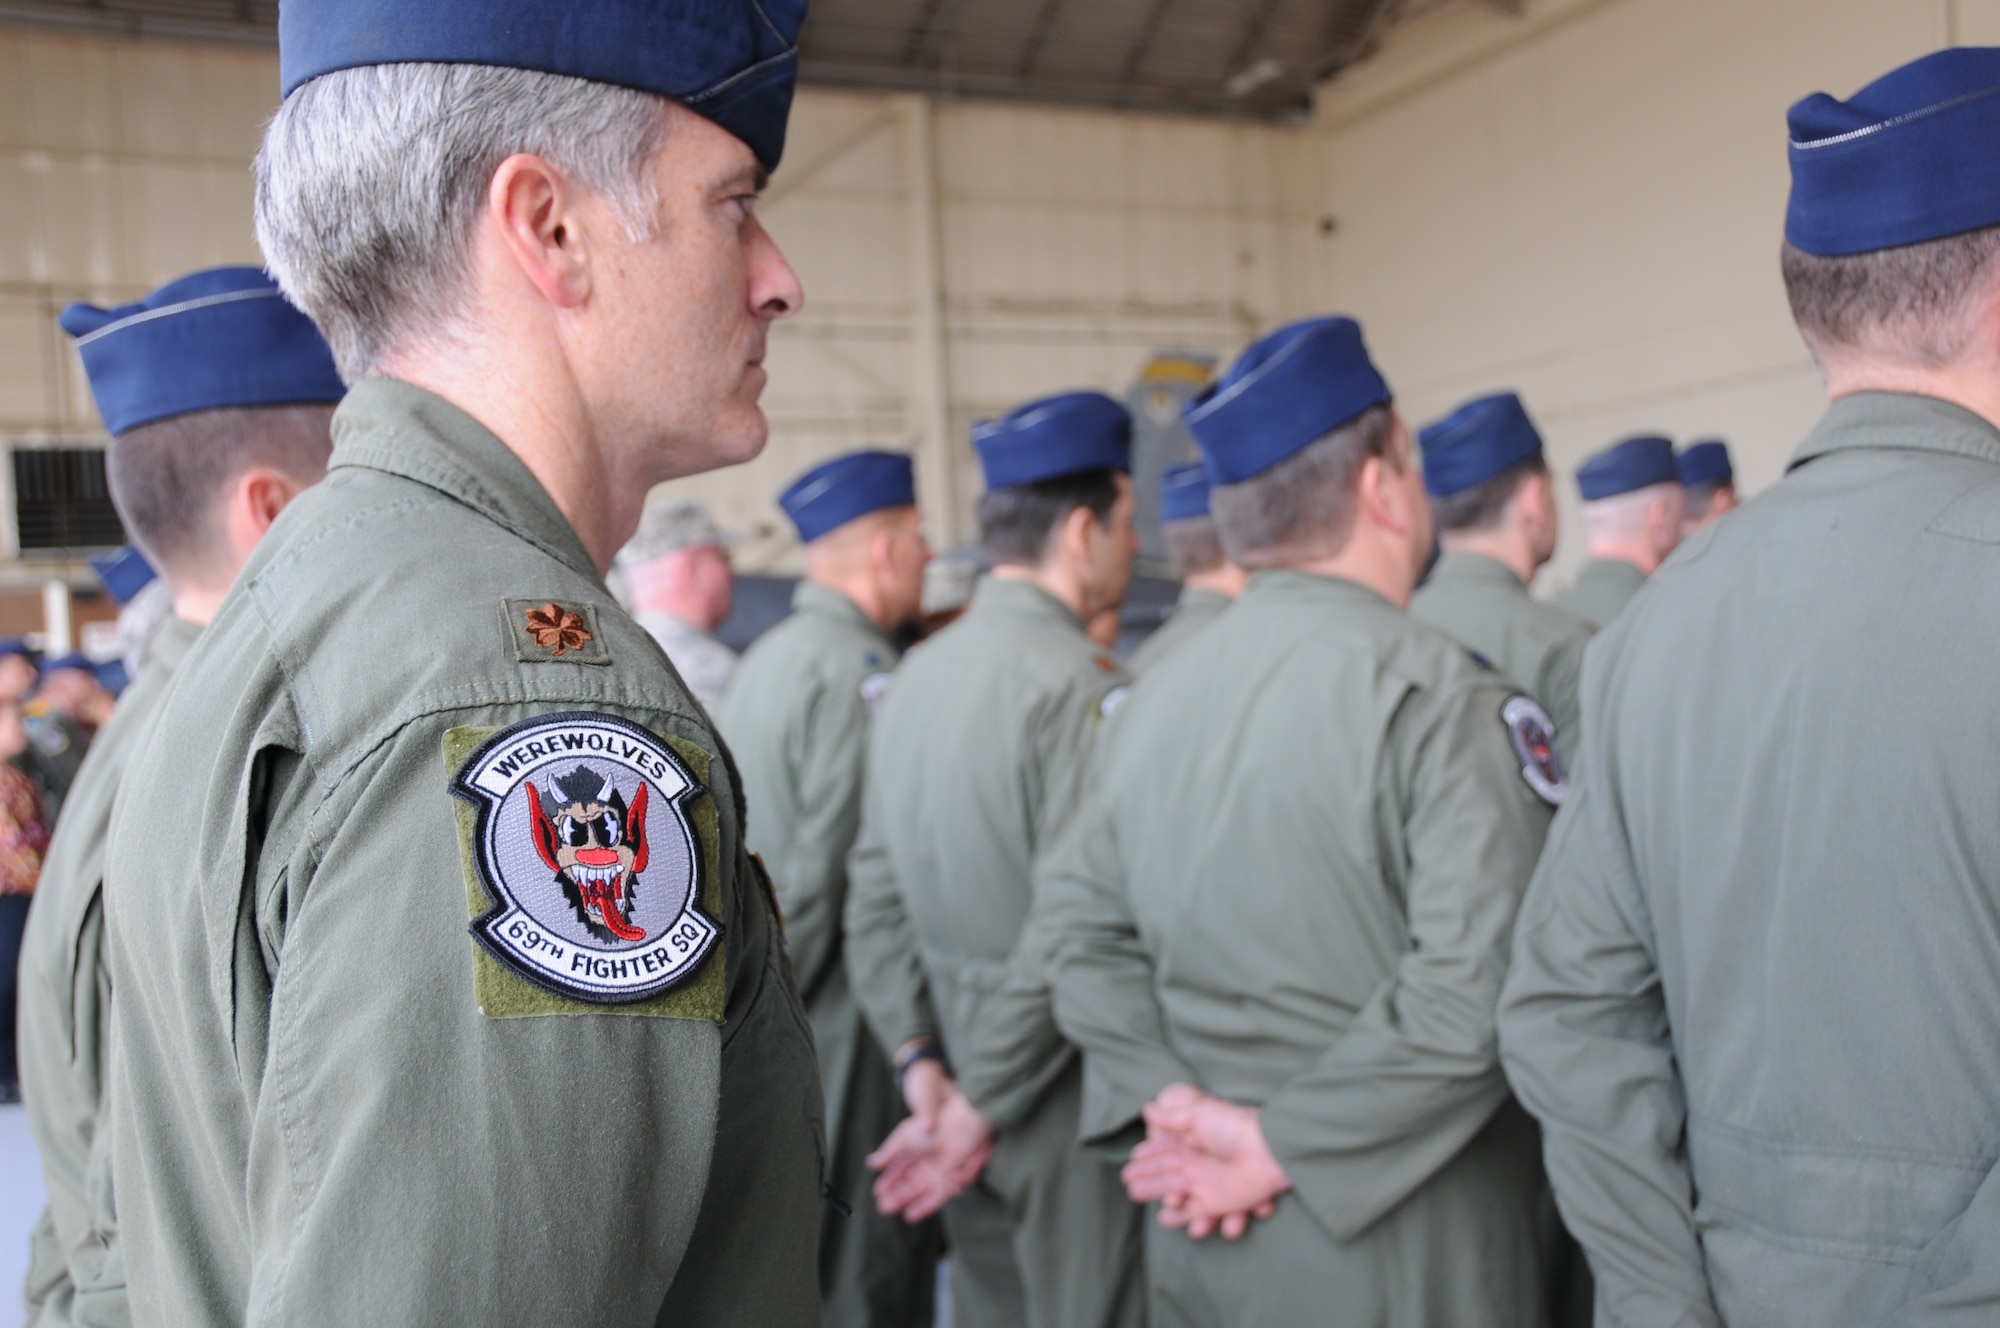 The pilots of the 301st Fighter Squadron changed their patch to the 69th Fighter Squadron during a ceremony March 5. The 301st FS, which traces its roots to the Tuskegee Airmen of World War II, will continue its legacy with the next generation aircraft, the F-22 Raptor, at Holloman Air Force Base, N.M., as a Reserve associate unit. The 69th FS pilots will continue their reserve associate pilot training program with the 56th Fighter Wing here at Luke. (U.S. Air Force photo/Tech. Sgt. Susan
Stout)
